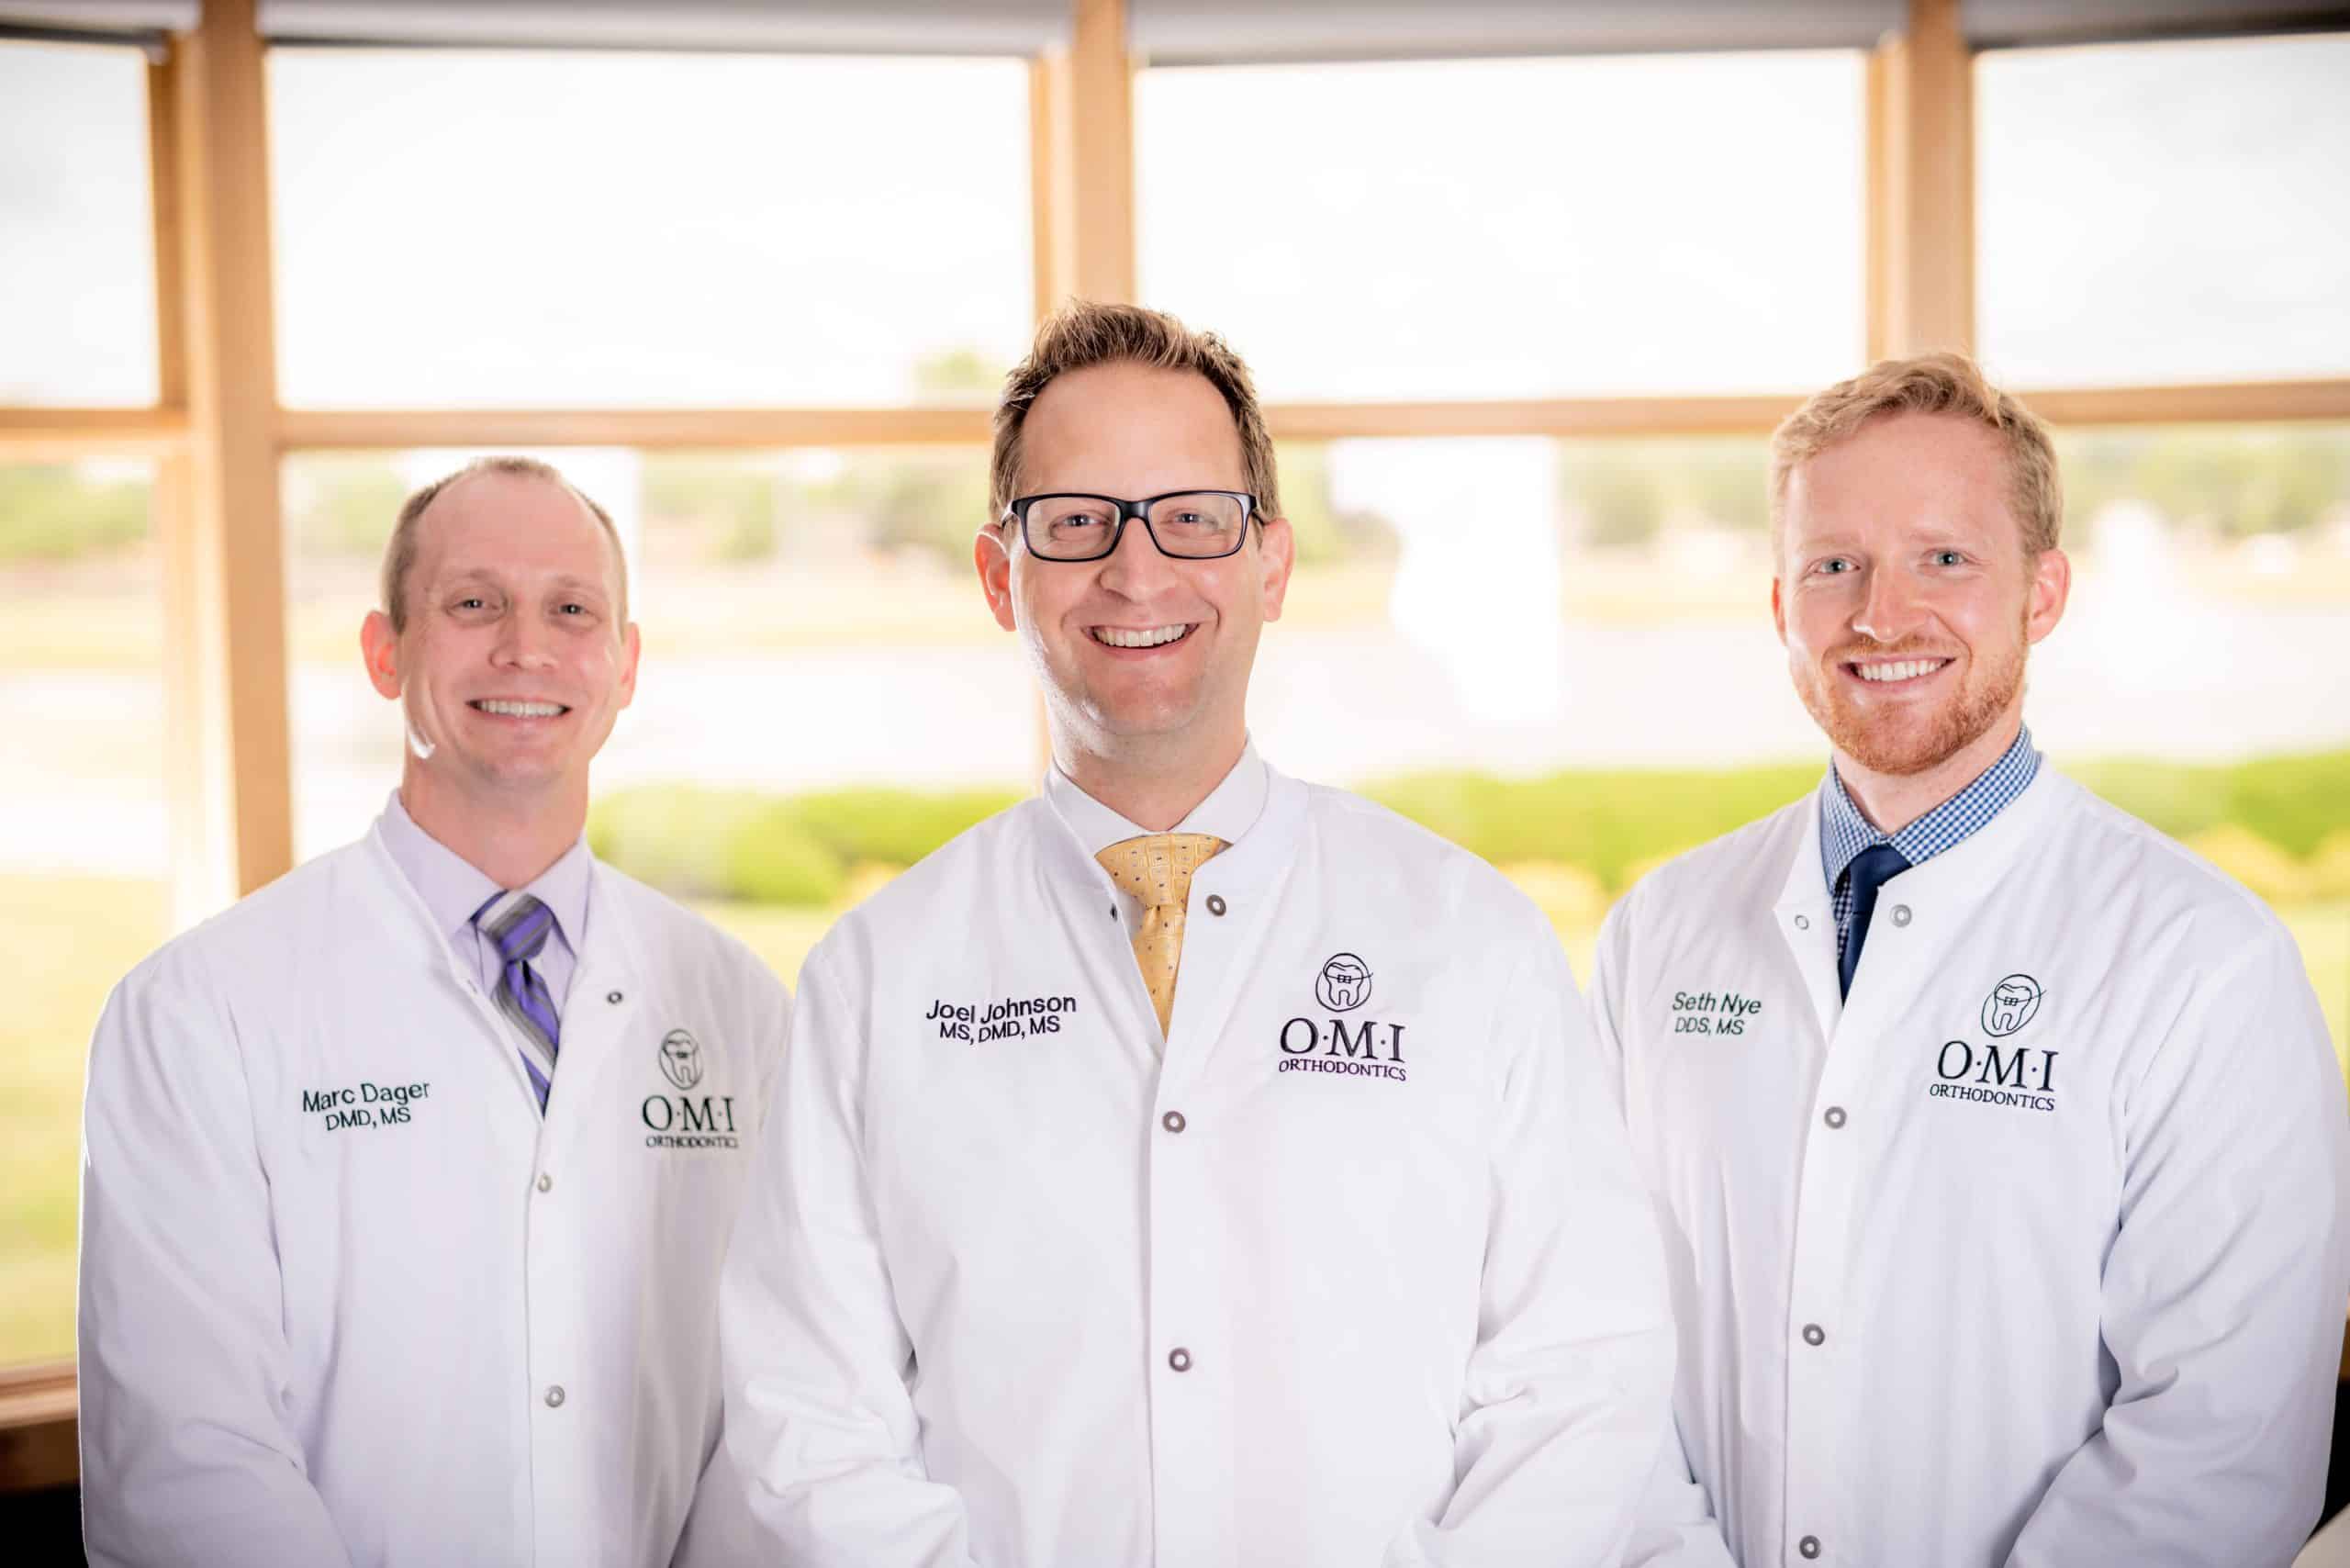 about us doctors OMI Orthodontics dentist in Fort Wayne Auburn Fishers Indiana Dr. Joel Johnson, MS, DMD, MS Dr. Marcus Dager, DMD, MS Dr. Seth Nye, DDS, MS Orthodontist in Fort Wayne 46825, Auburn 46706, Fishers 46037, IN.